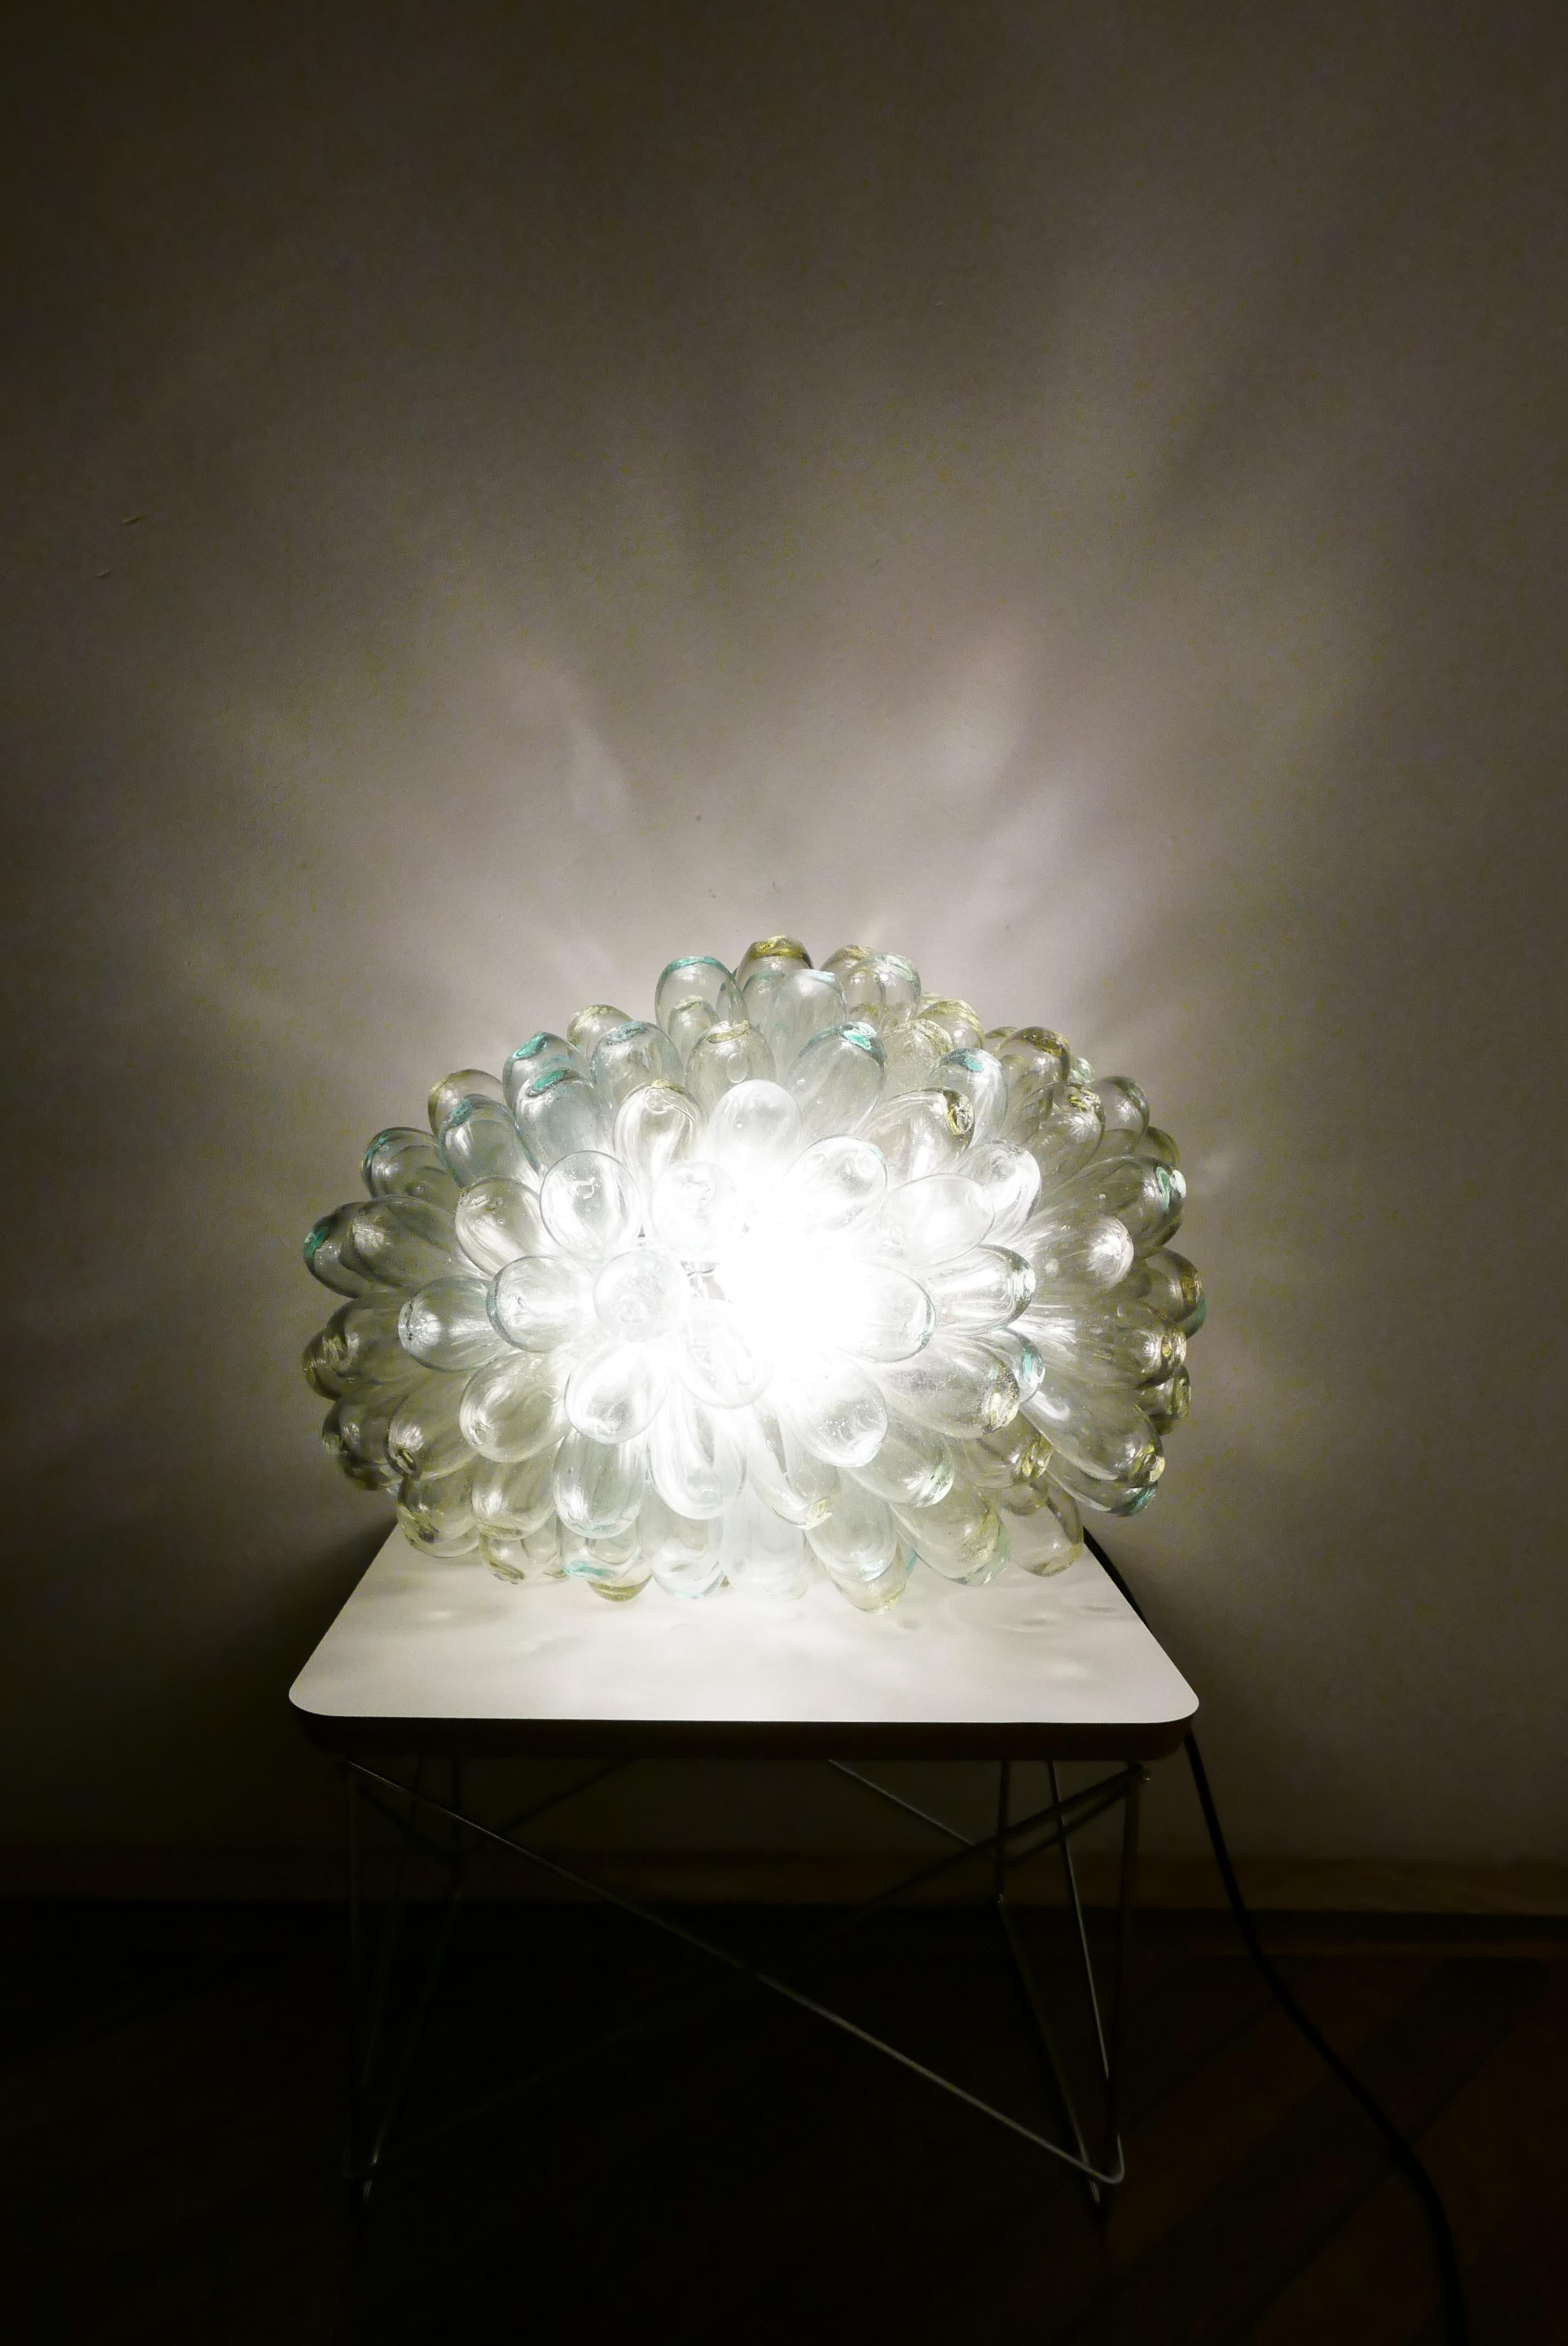 Contemporary Tablelamp or floorlamp from mouthblown glass - transparent For Sale